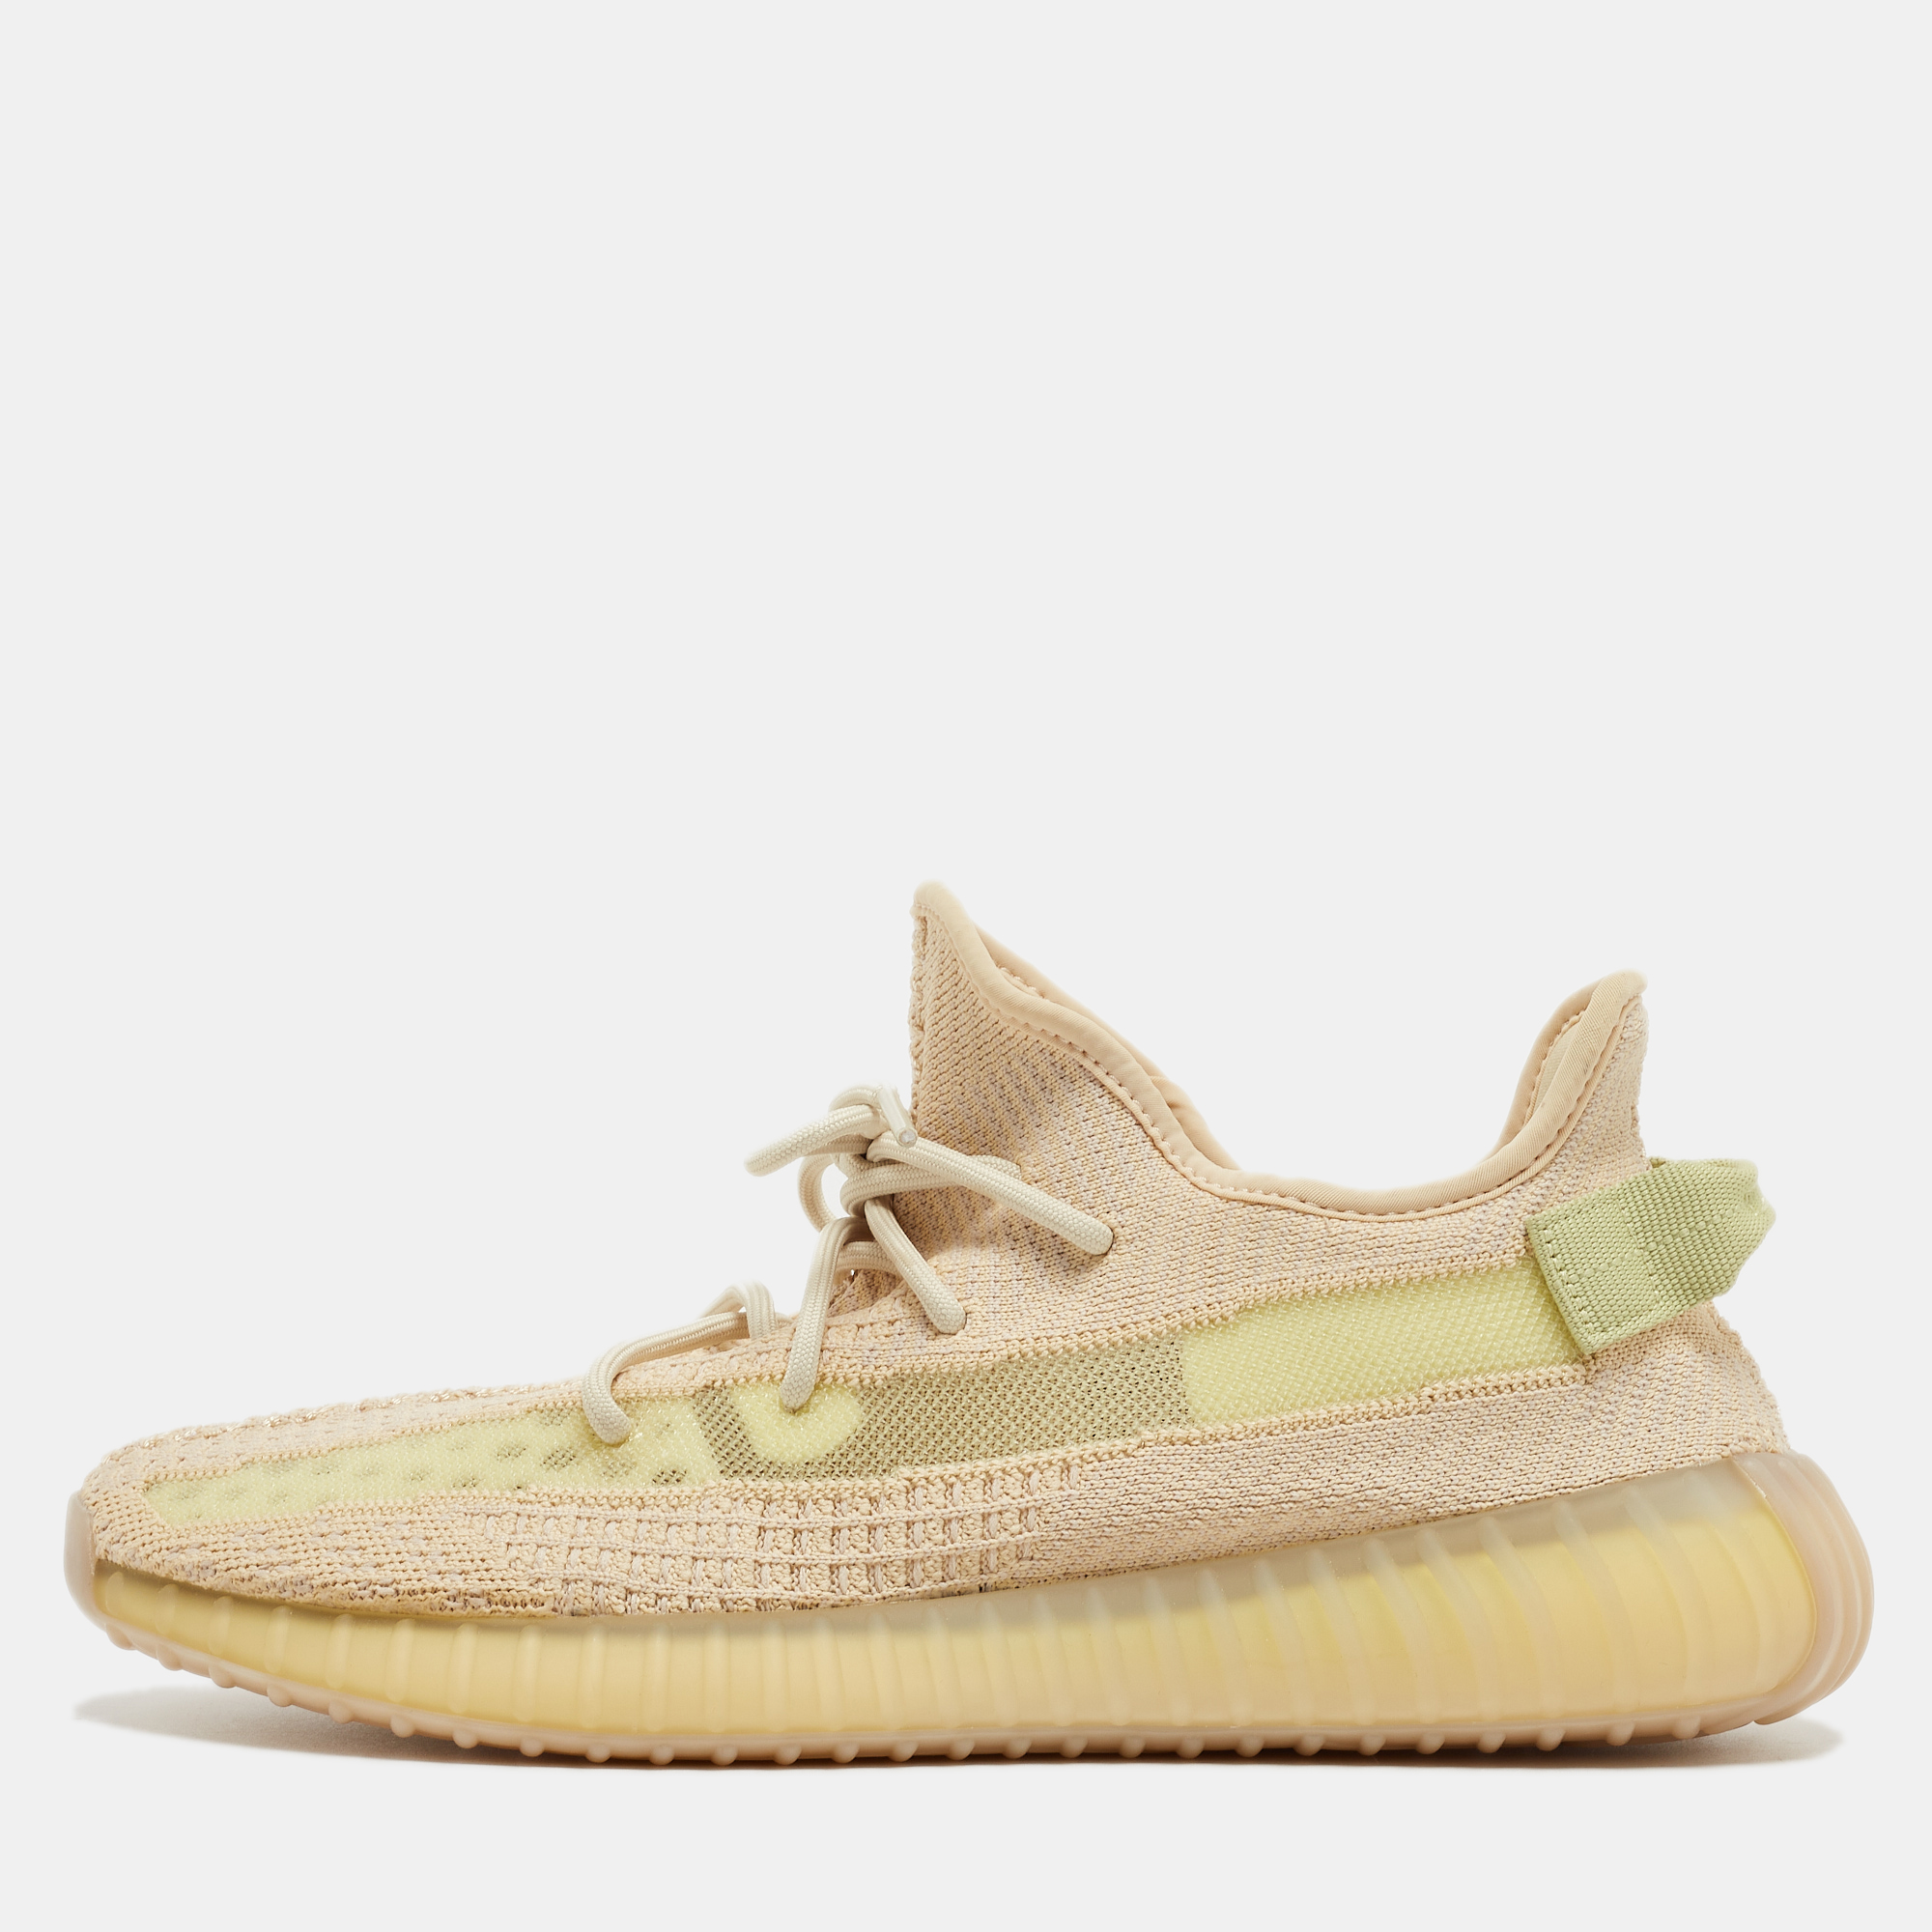 Pre-owned Yeezy X Adidas Beige Knit Boost 350 V2 Trainers Size 44